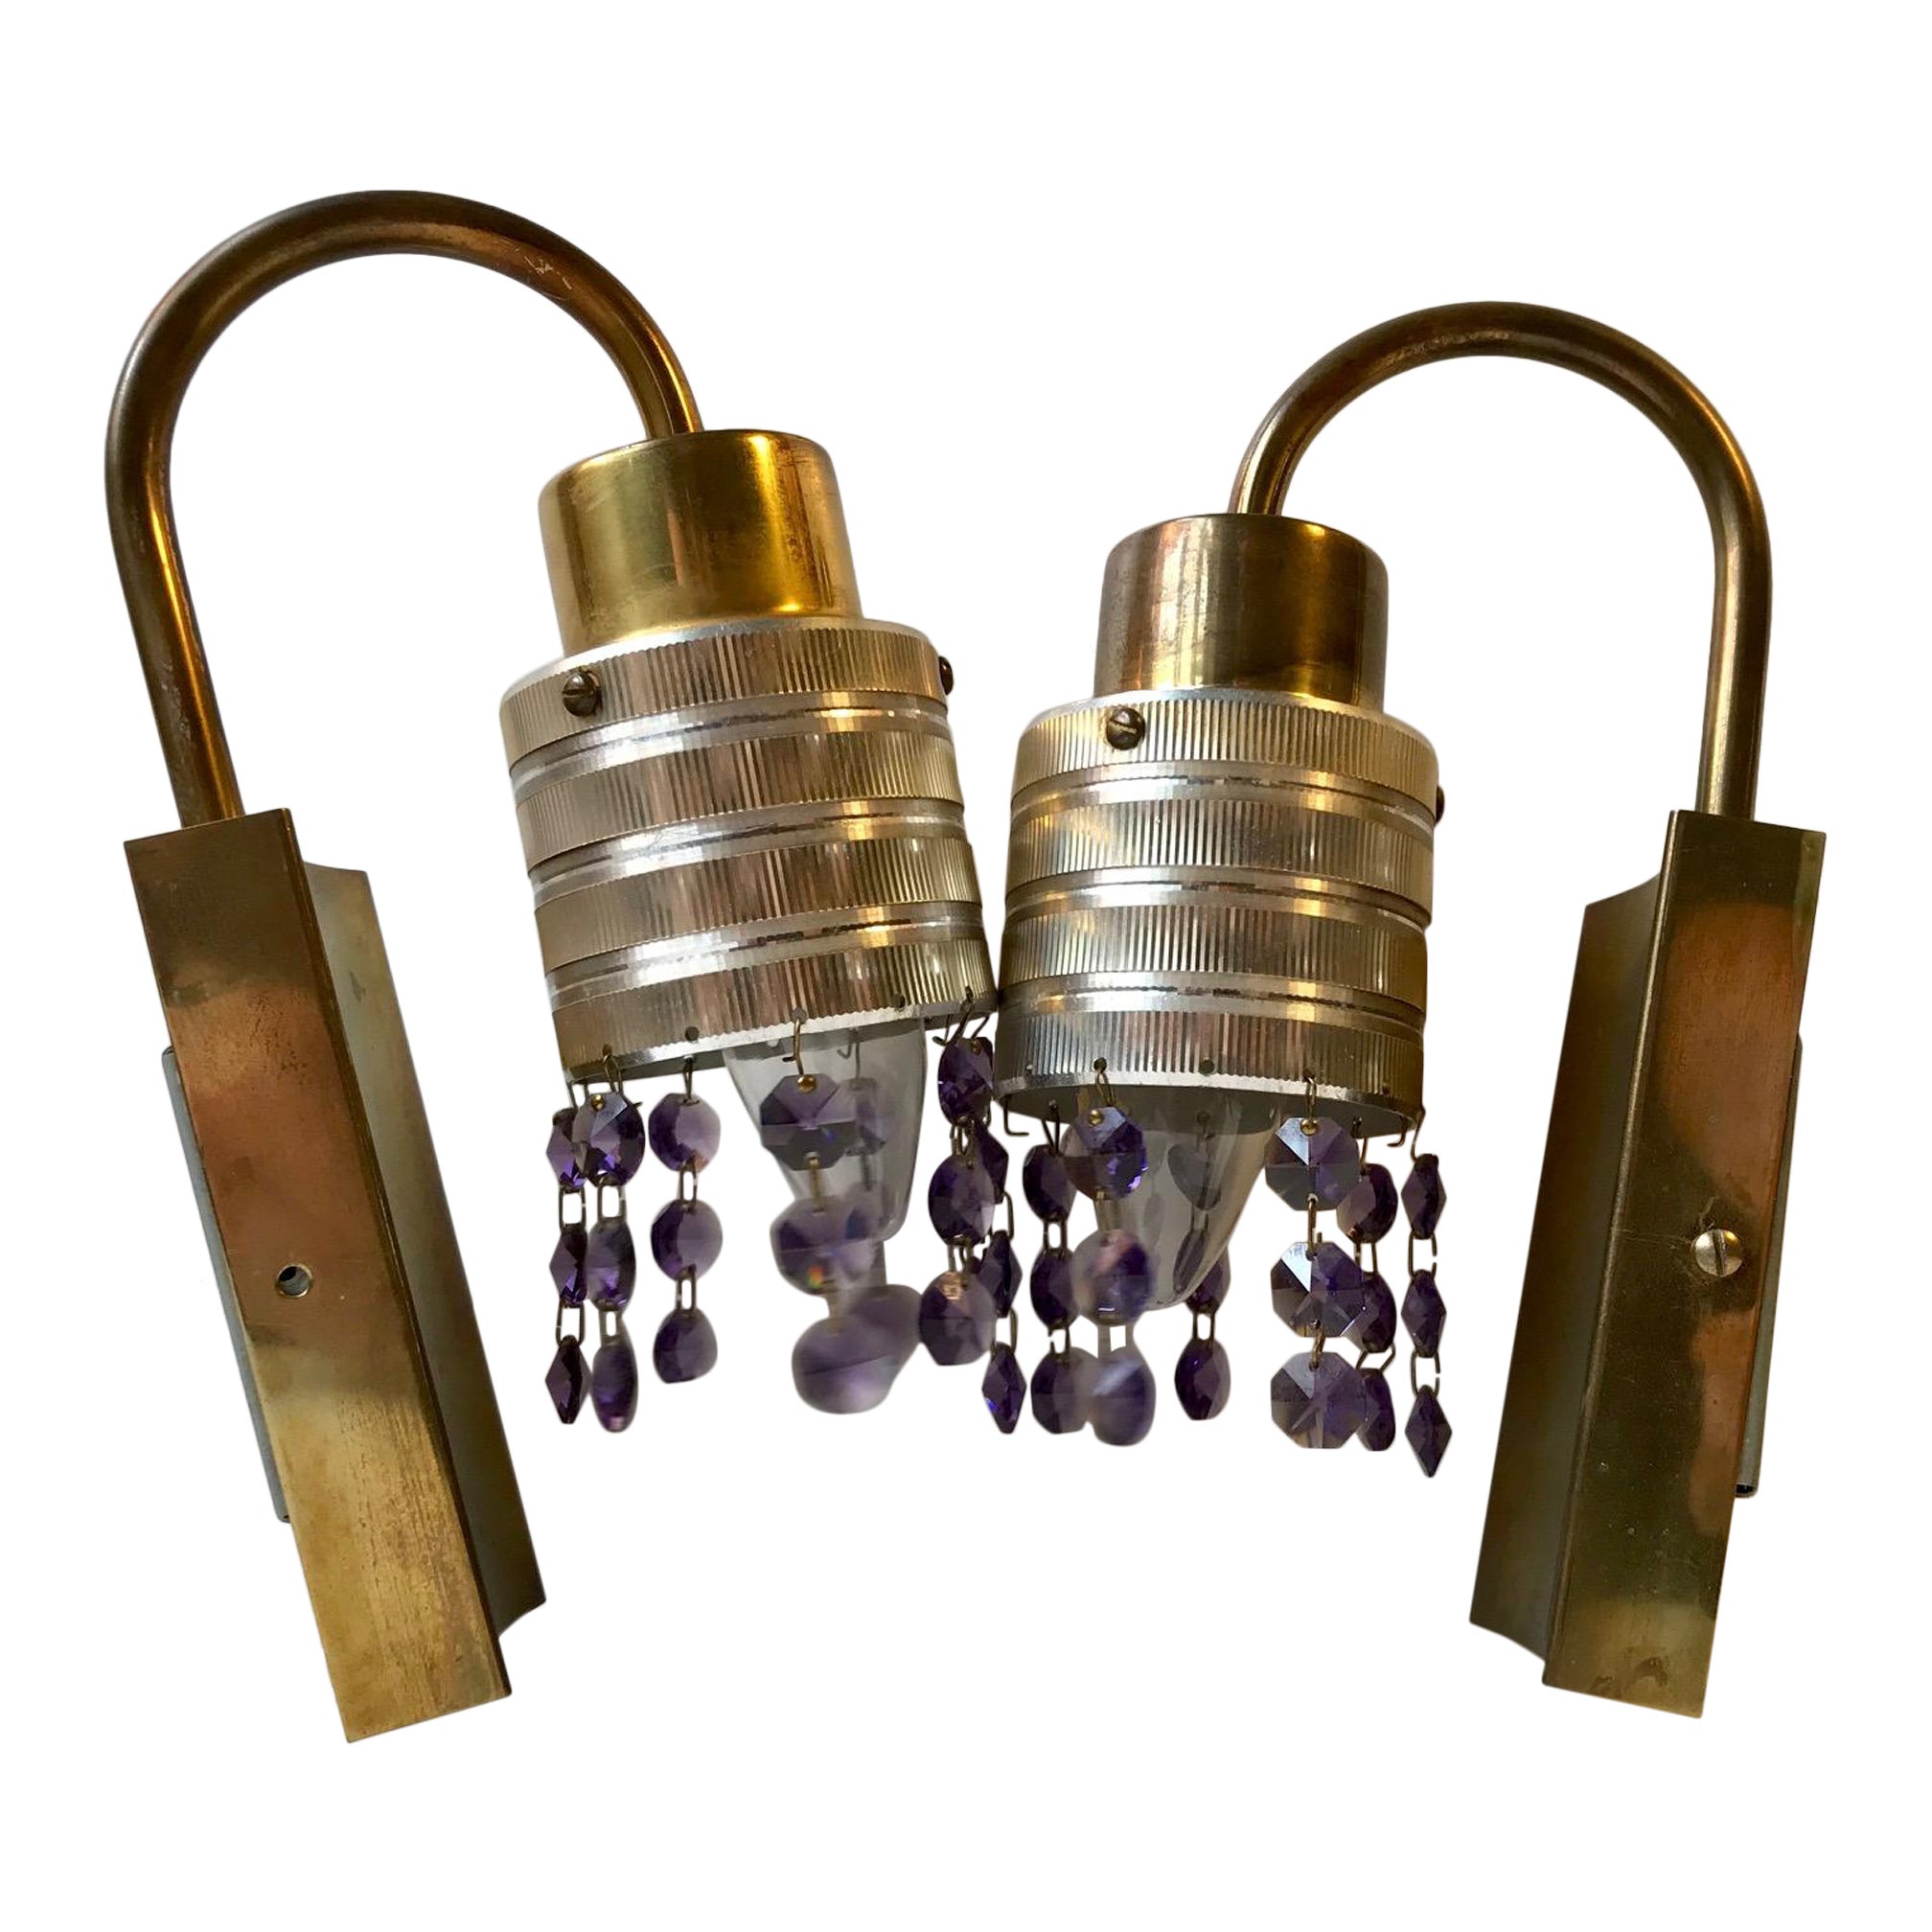 Scandinavian Modern Swag Prism Wall Sconces in Brass and Purple Crystal, 1960s For Sale